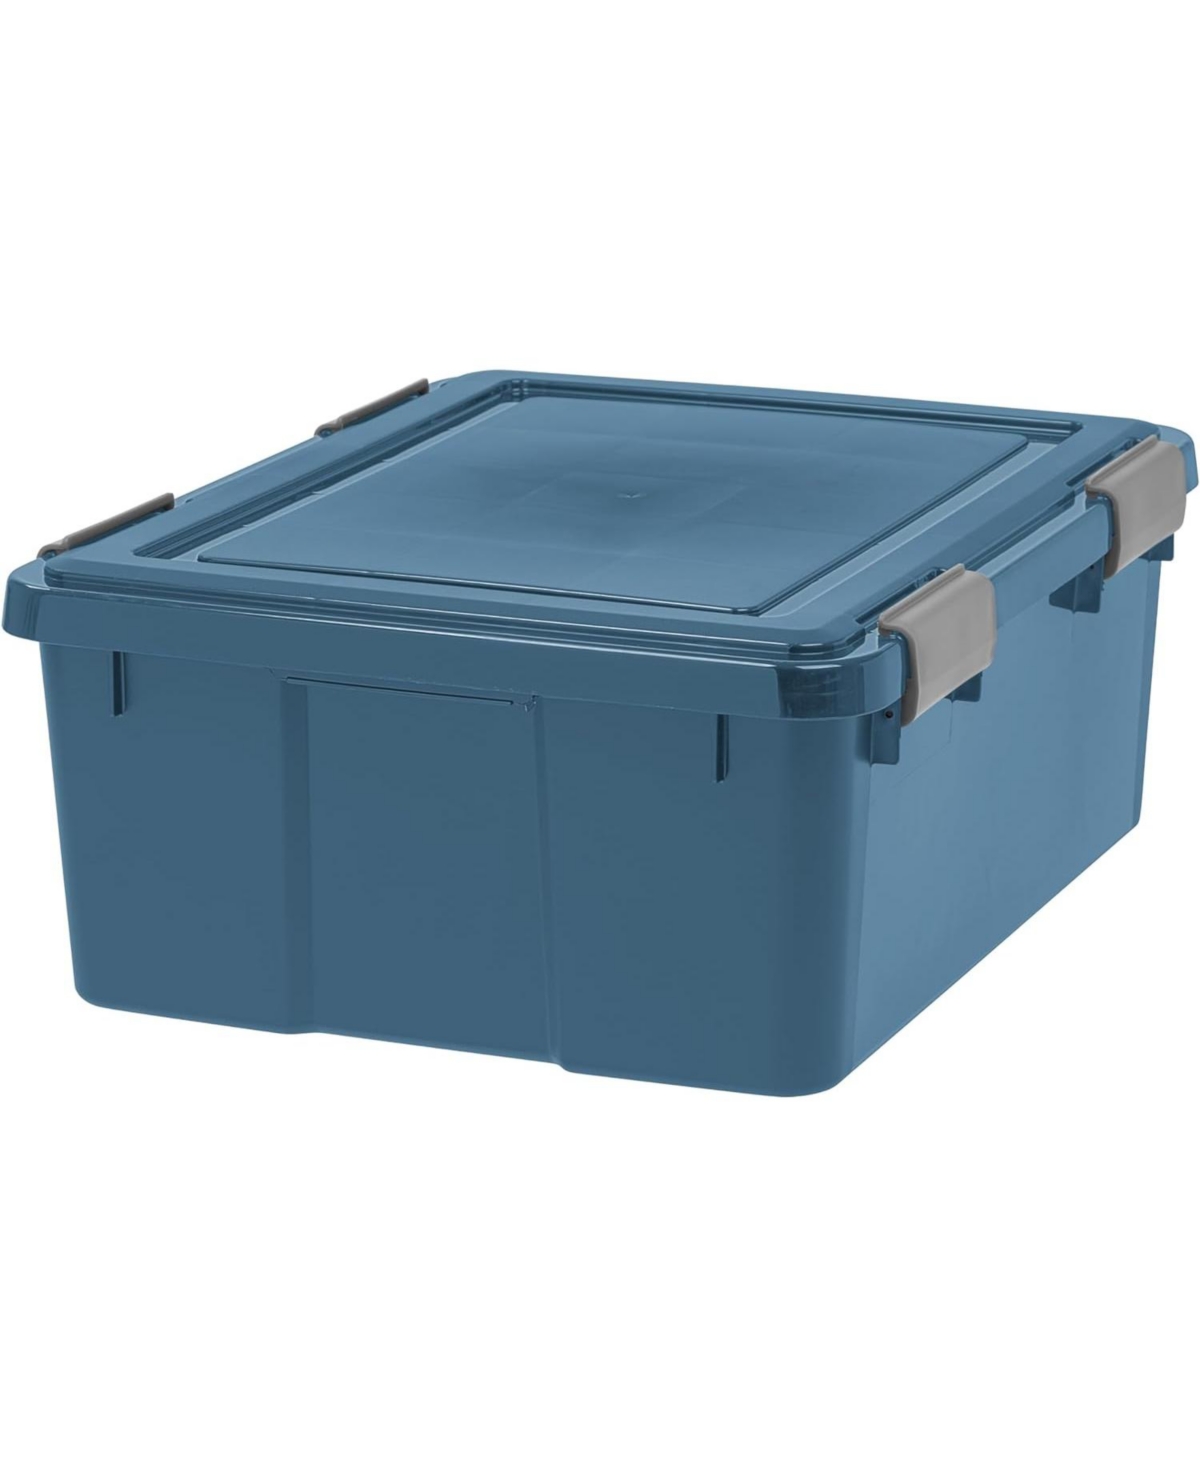 4 Pack 30.6qt Weatherpro Airtight Plastic Storage Bin with Lid and Seal and Secure Latching Buckles, Navy